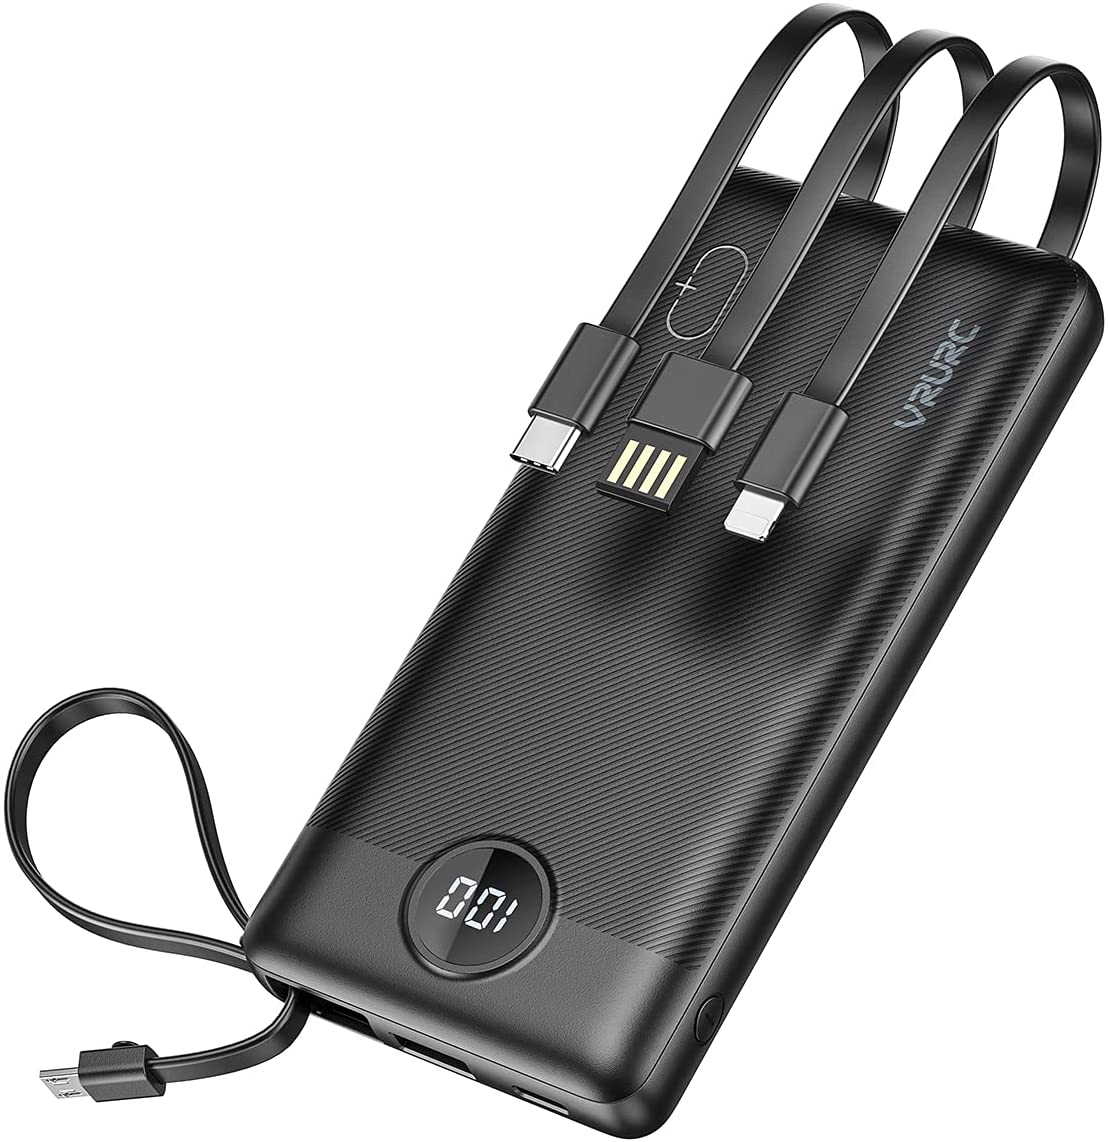 4 in 1 Built-in Cable Power Bank -10000 mAh